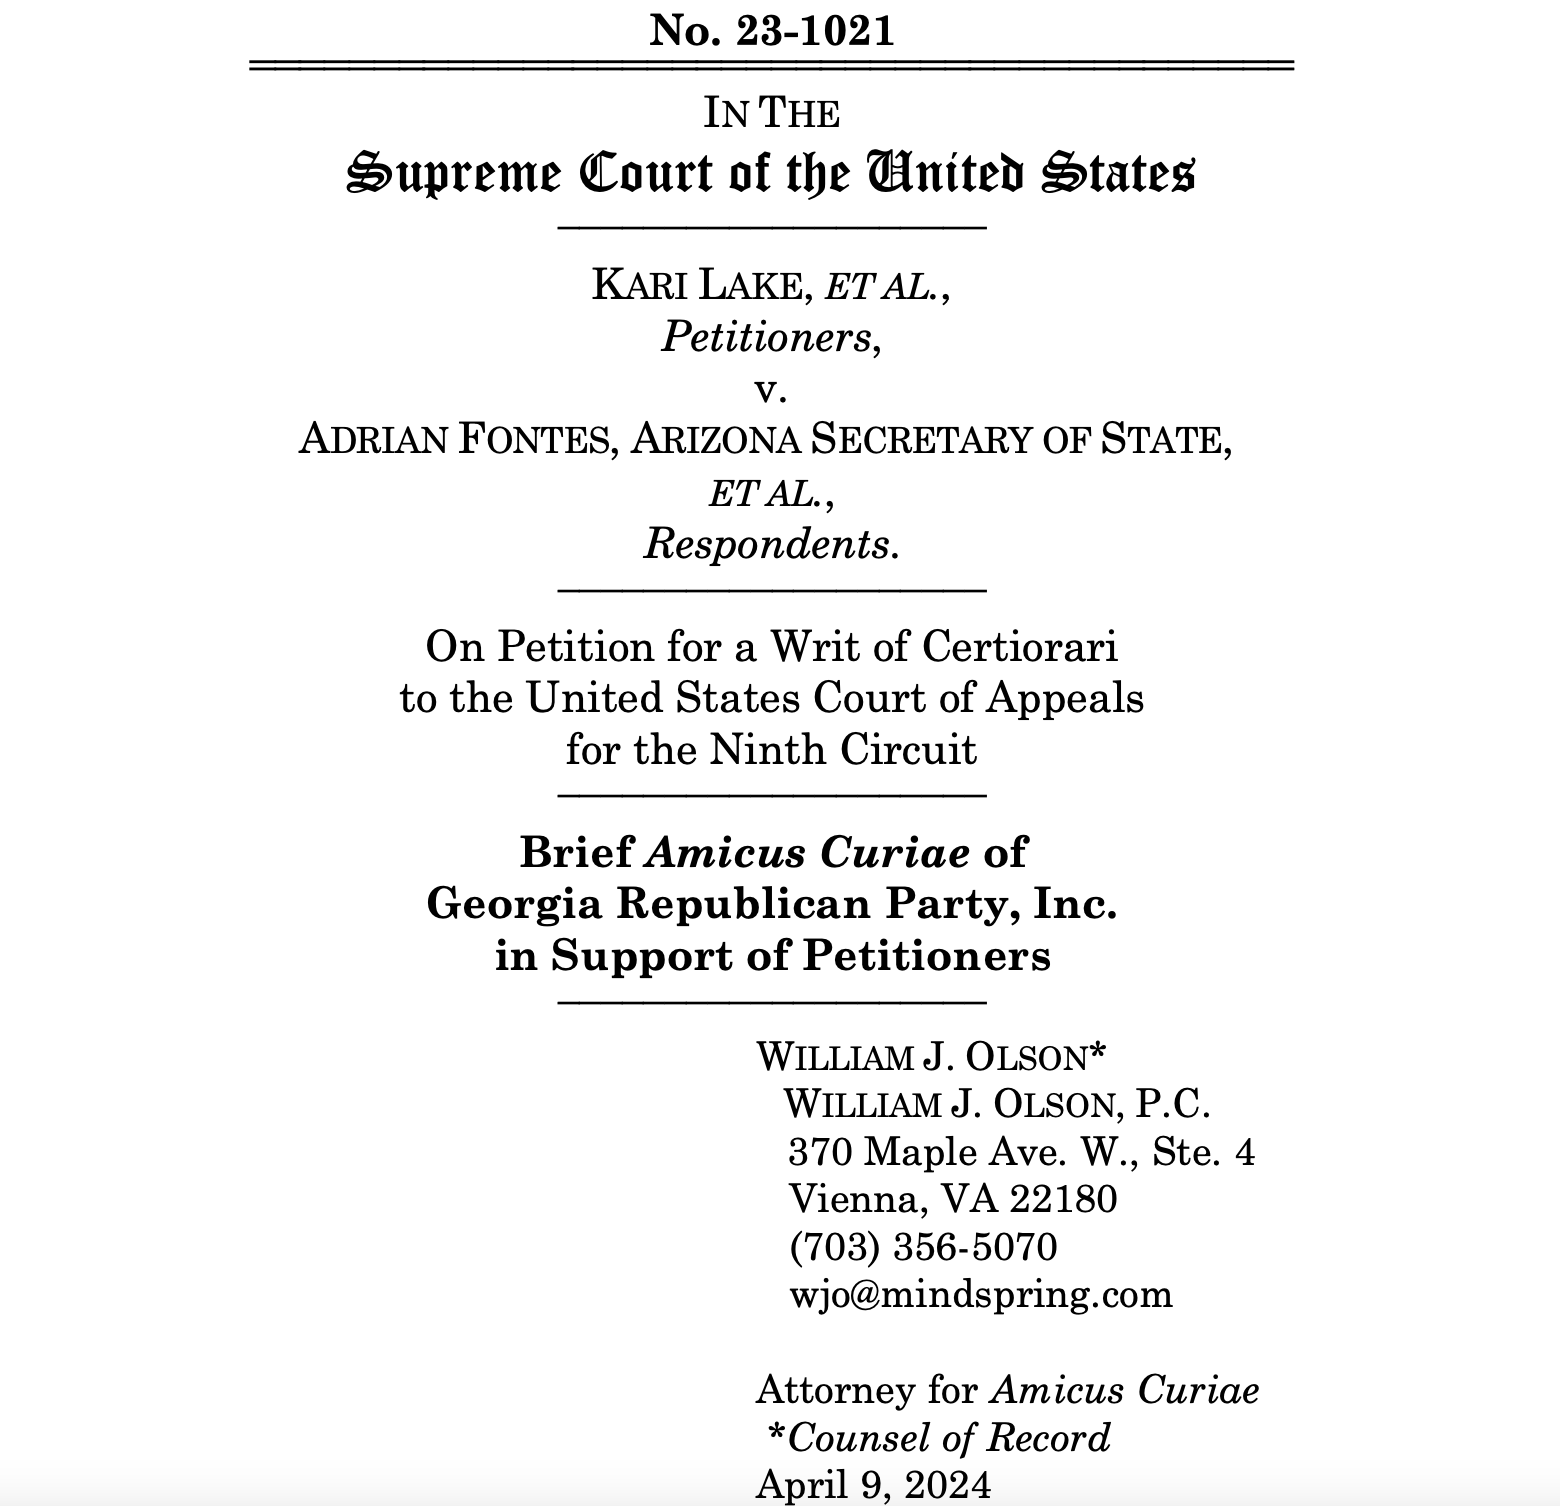 The Georgia Republican Party has filed an amicus brief in the Arizona election fraud case for the 2022 cycle which saw the election of Katie Hobbs as governor in an obvious fraudulent manner.